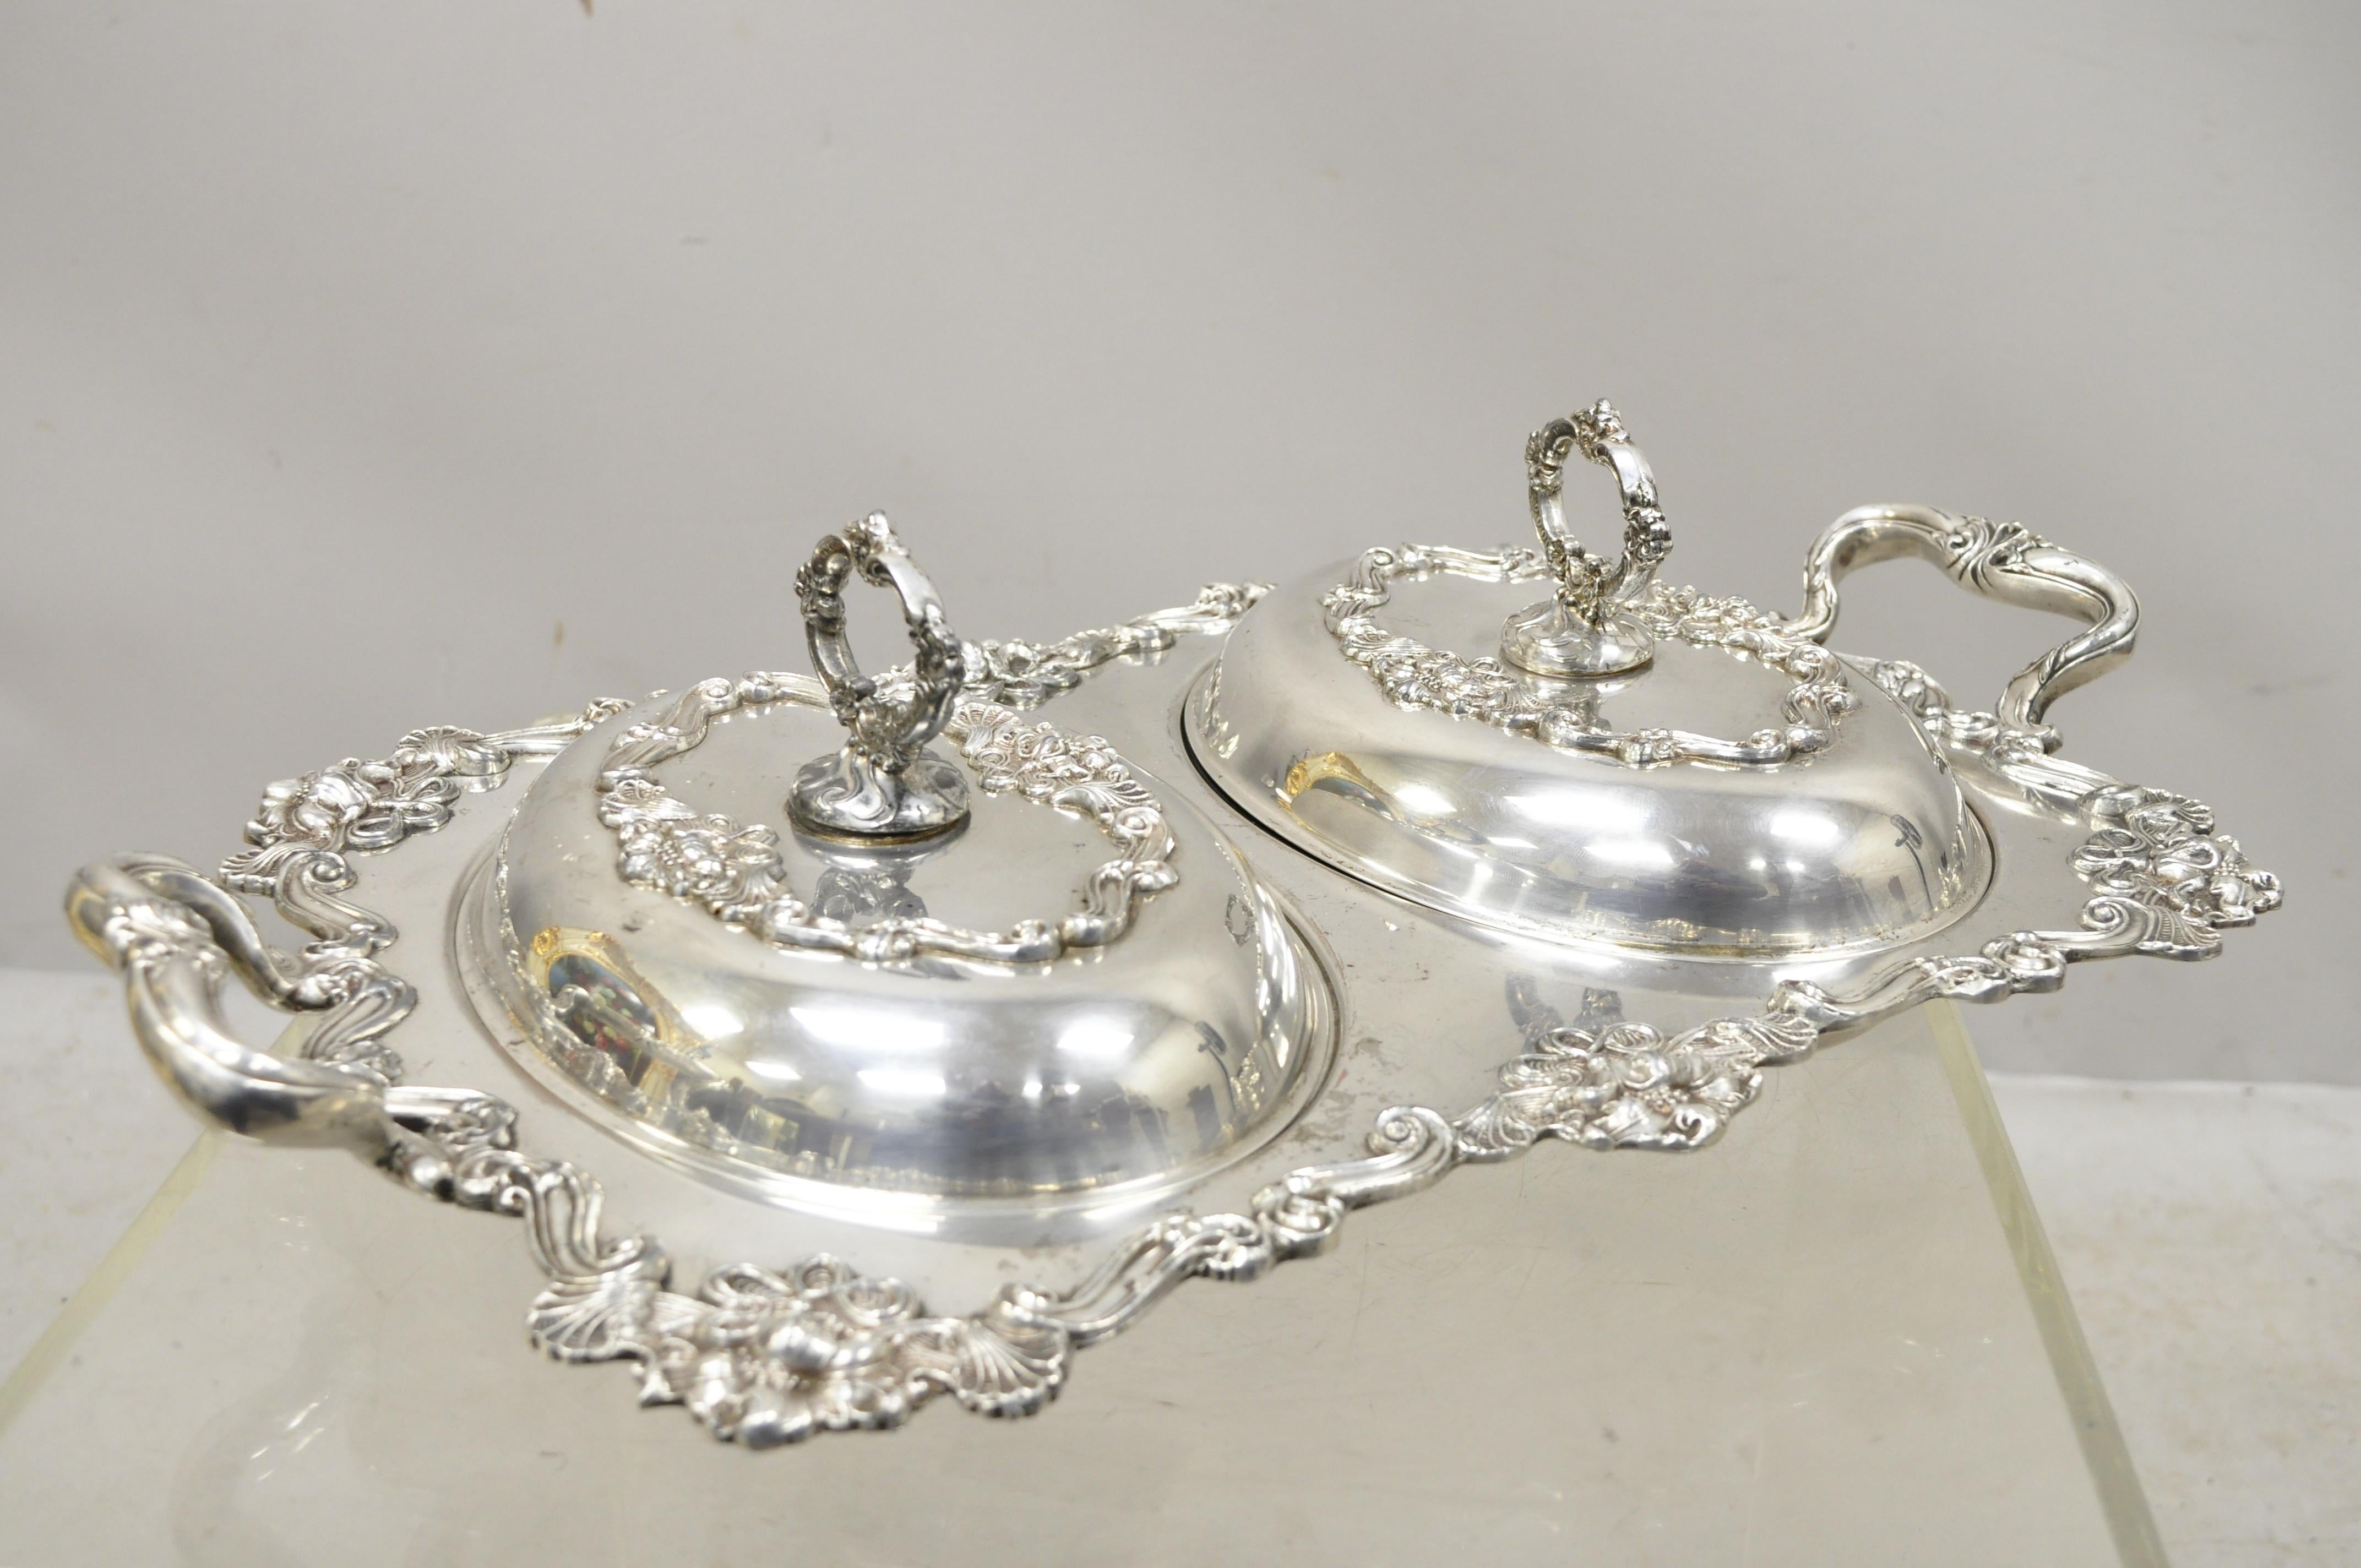 French Art Nouveau style silver plate double side serving dish English platter tray with lids. Item features double lids, ornate floral and lily flower scrollwork, twin handles, very nice antique item, great style and form. Great for use as a fancy